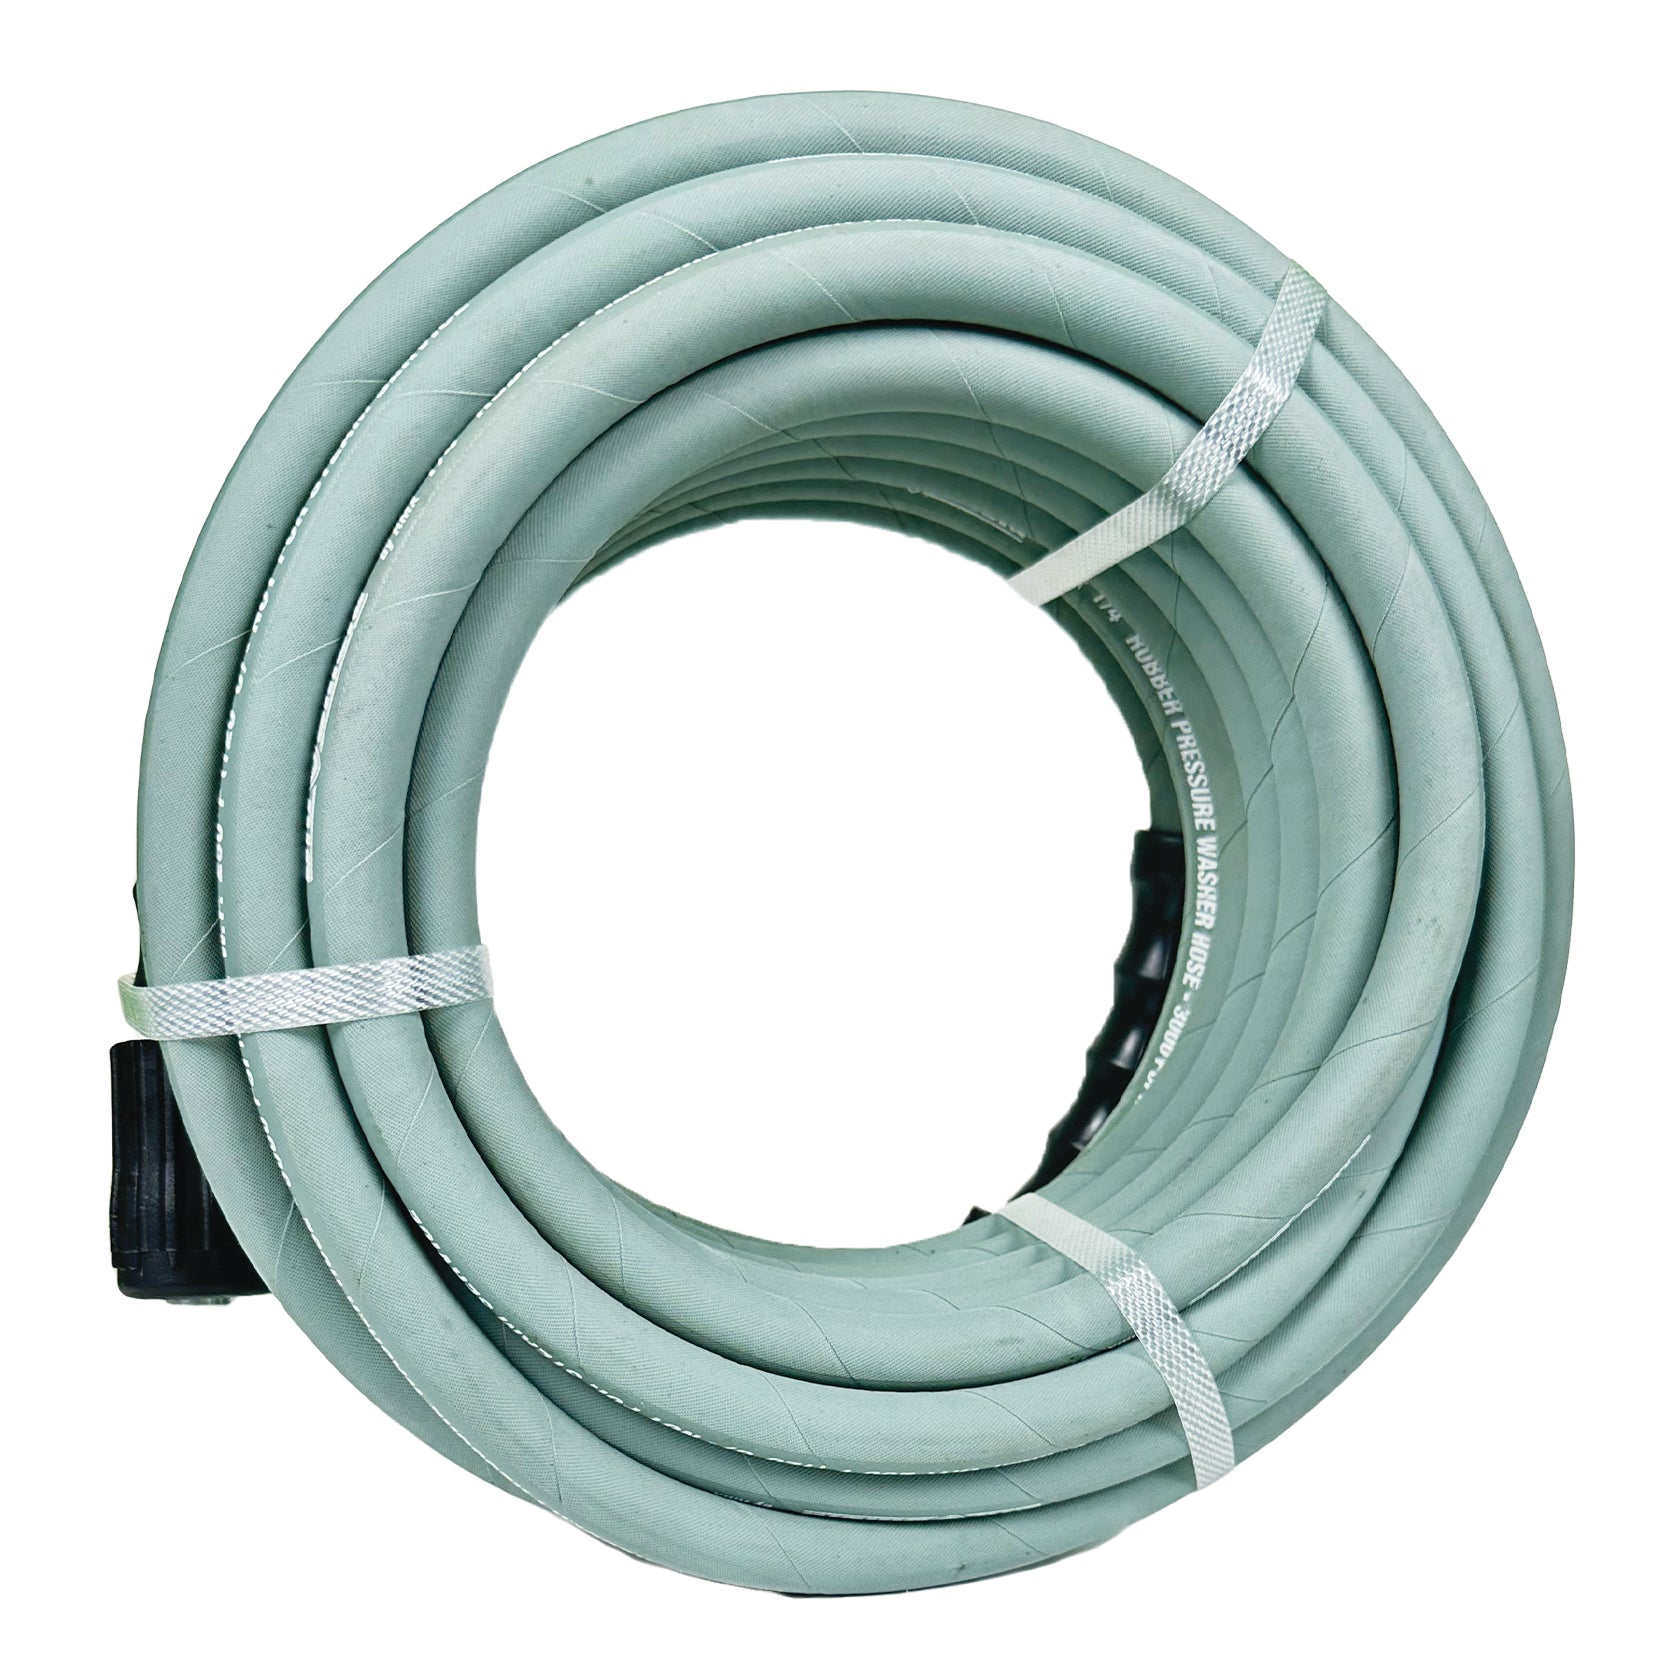 Blushield Pressure Washer Hose Non Marking 1/4" x 25' with M22